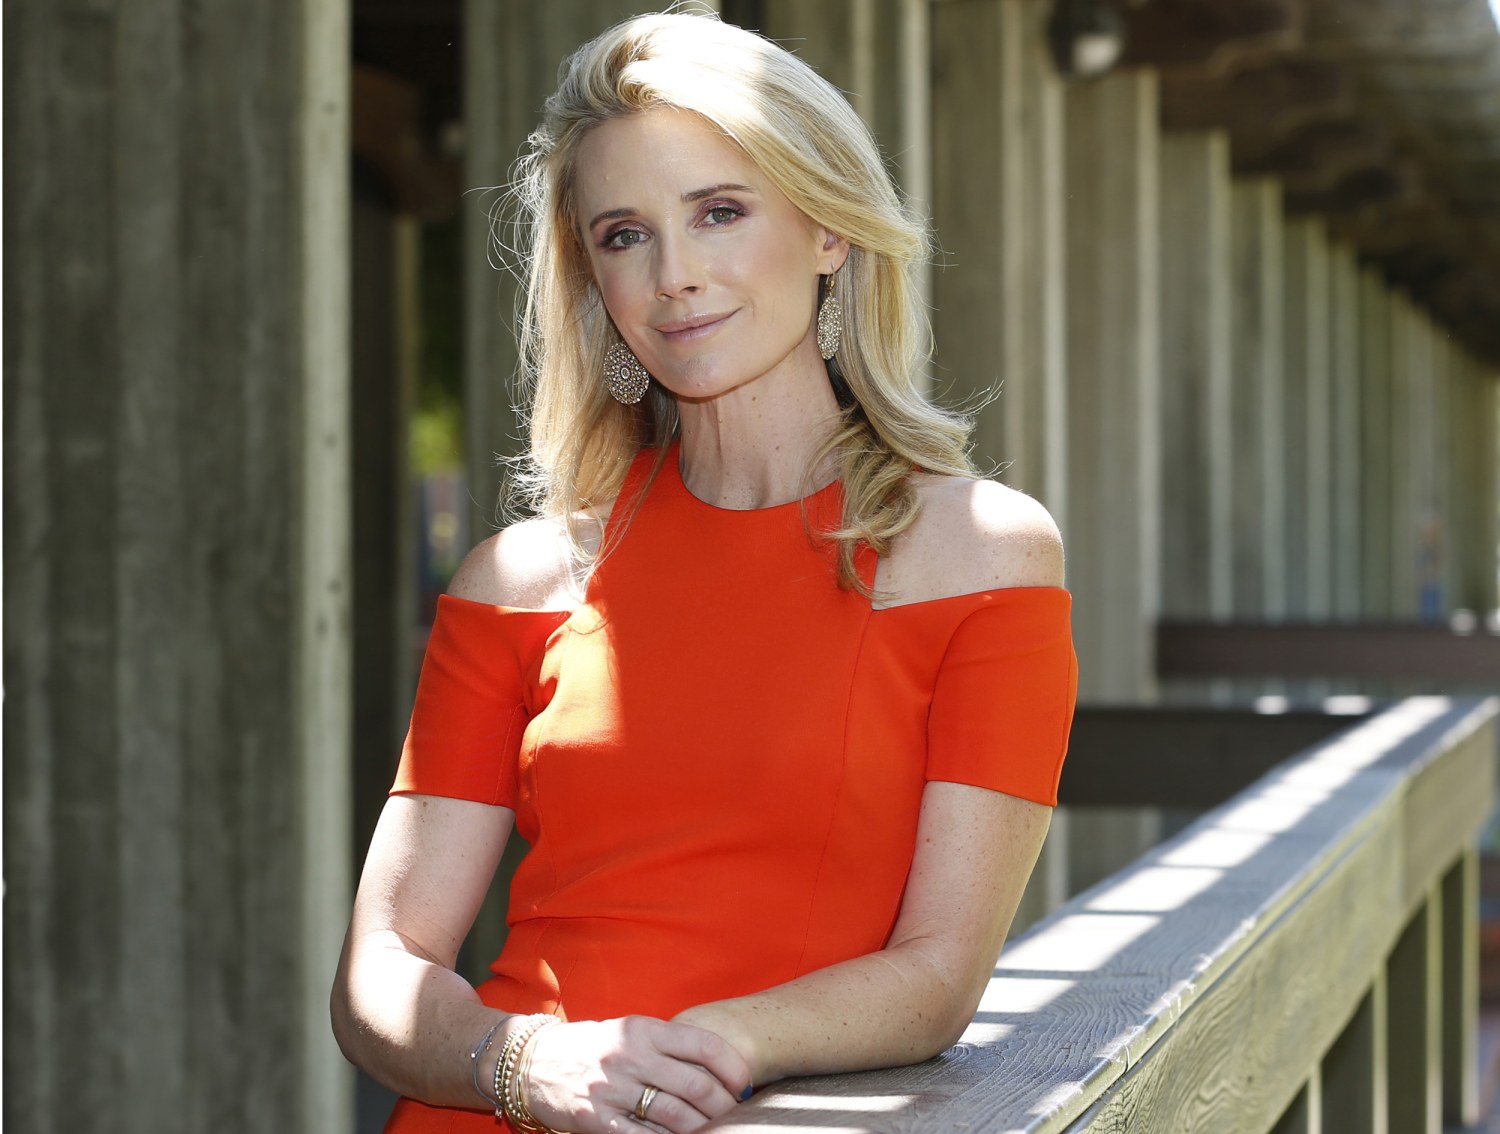 Jennifer Siebel Newsom, actor married to California governor, breaks down in tears at Harvey Weinsteins sex crimes trial photo